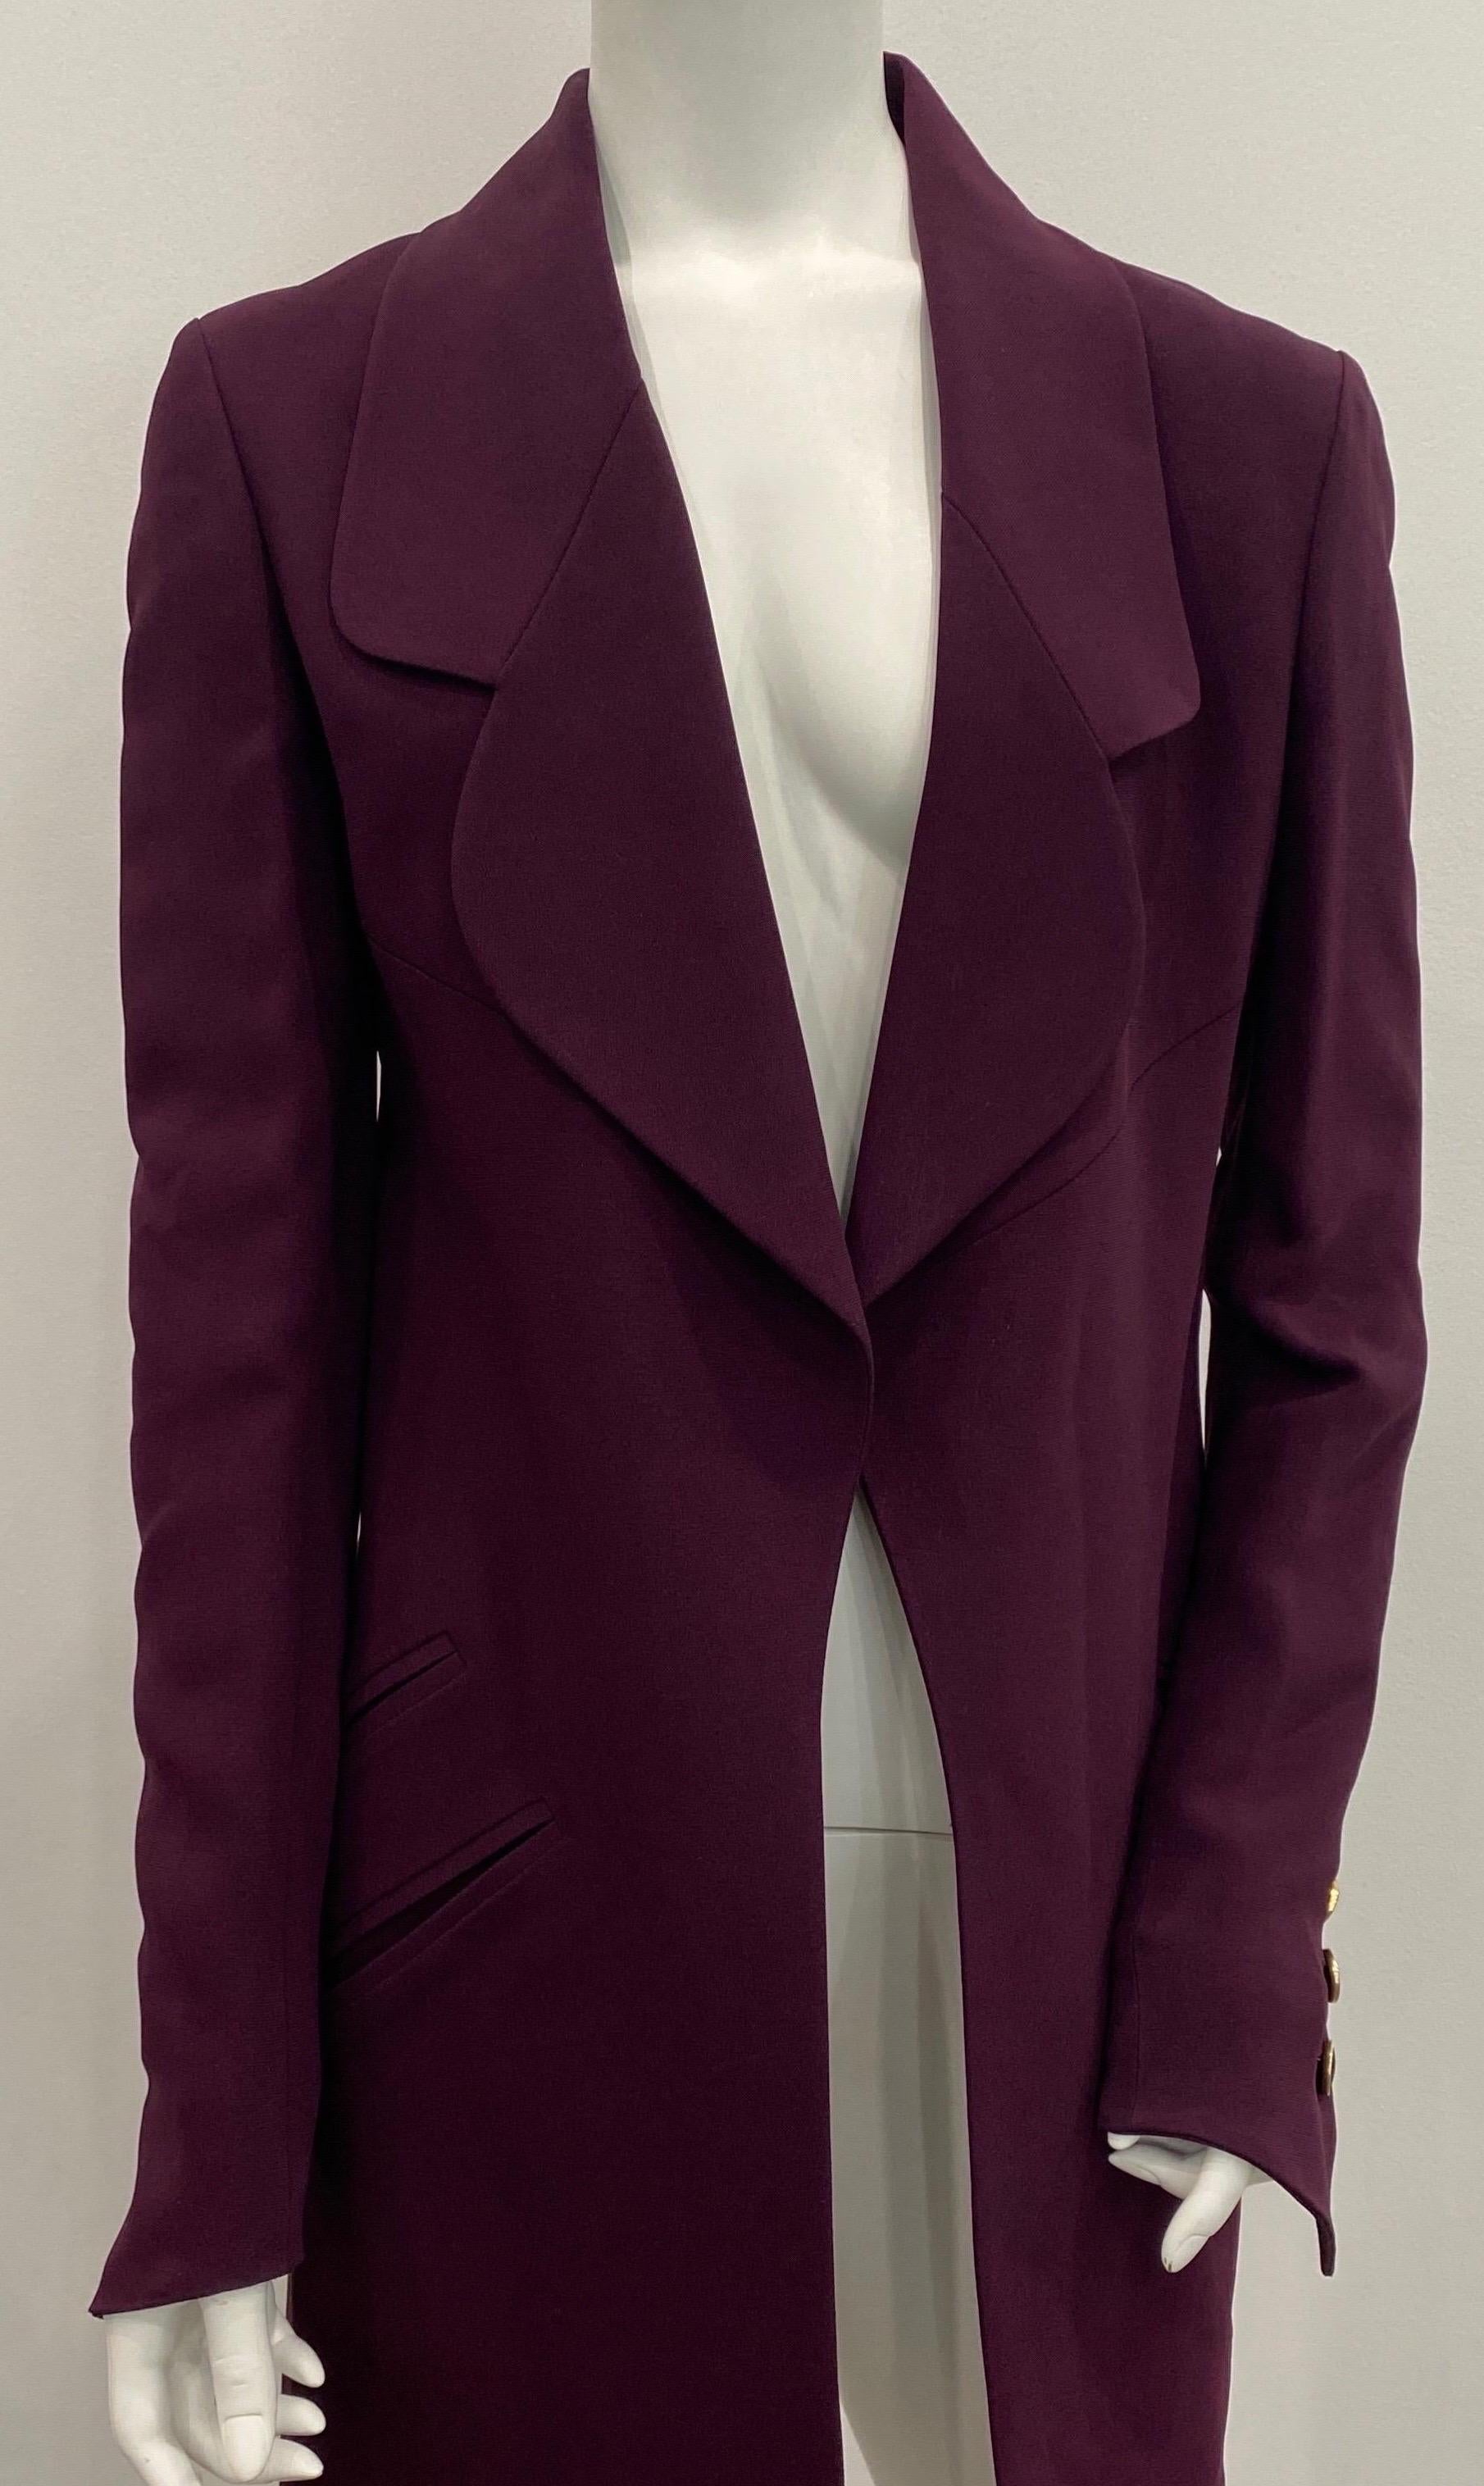 Karl Lagerfeld Eggplant 3/4 Coat - Size 36 In Good Condition For Sale In West Palm Beach, FL